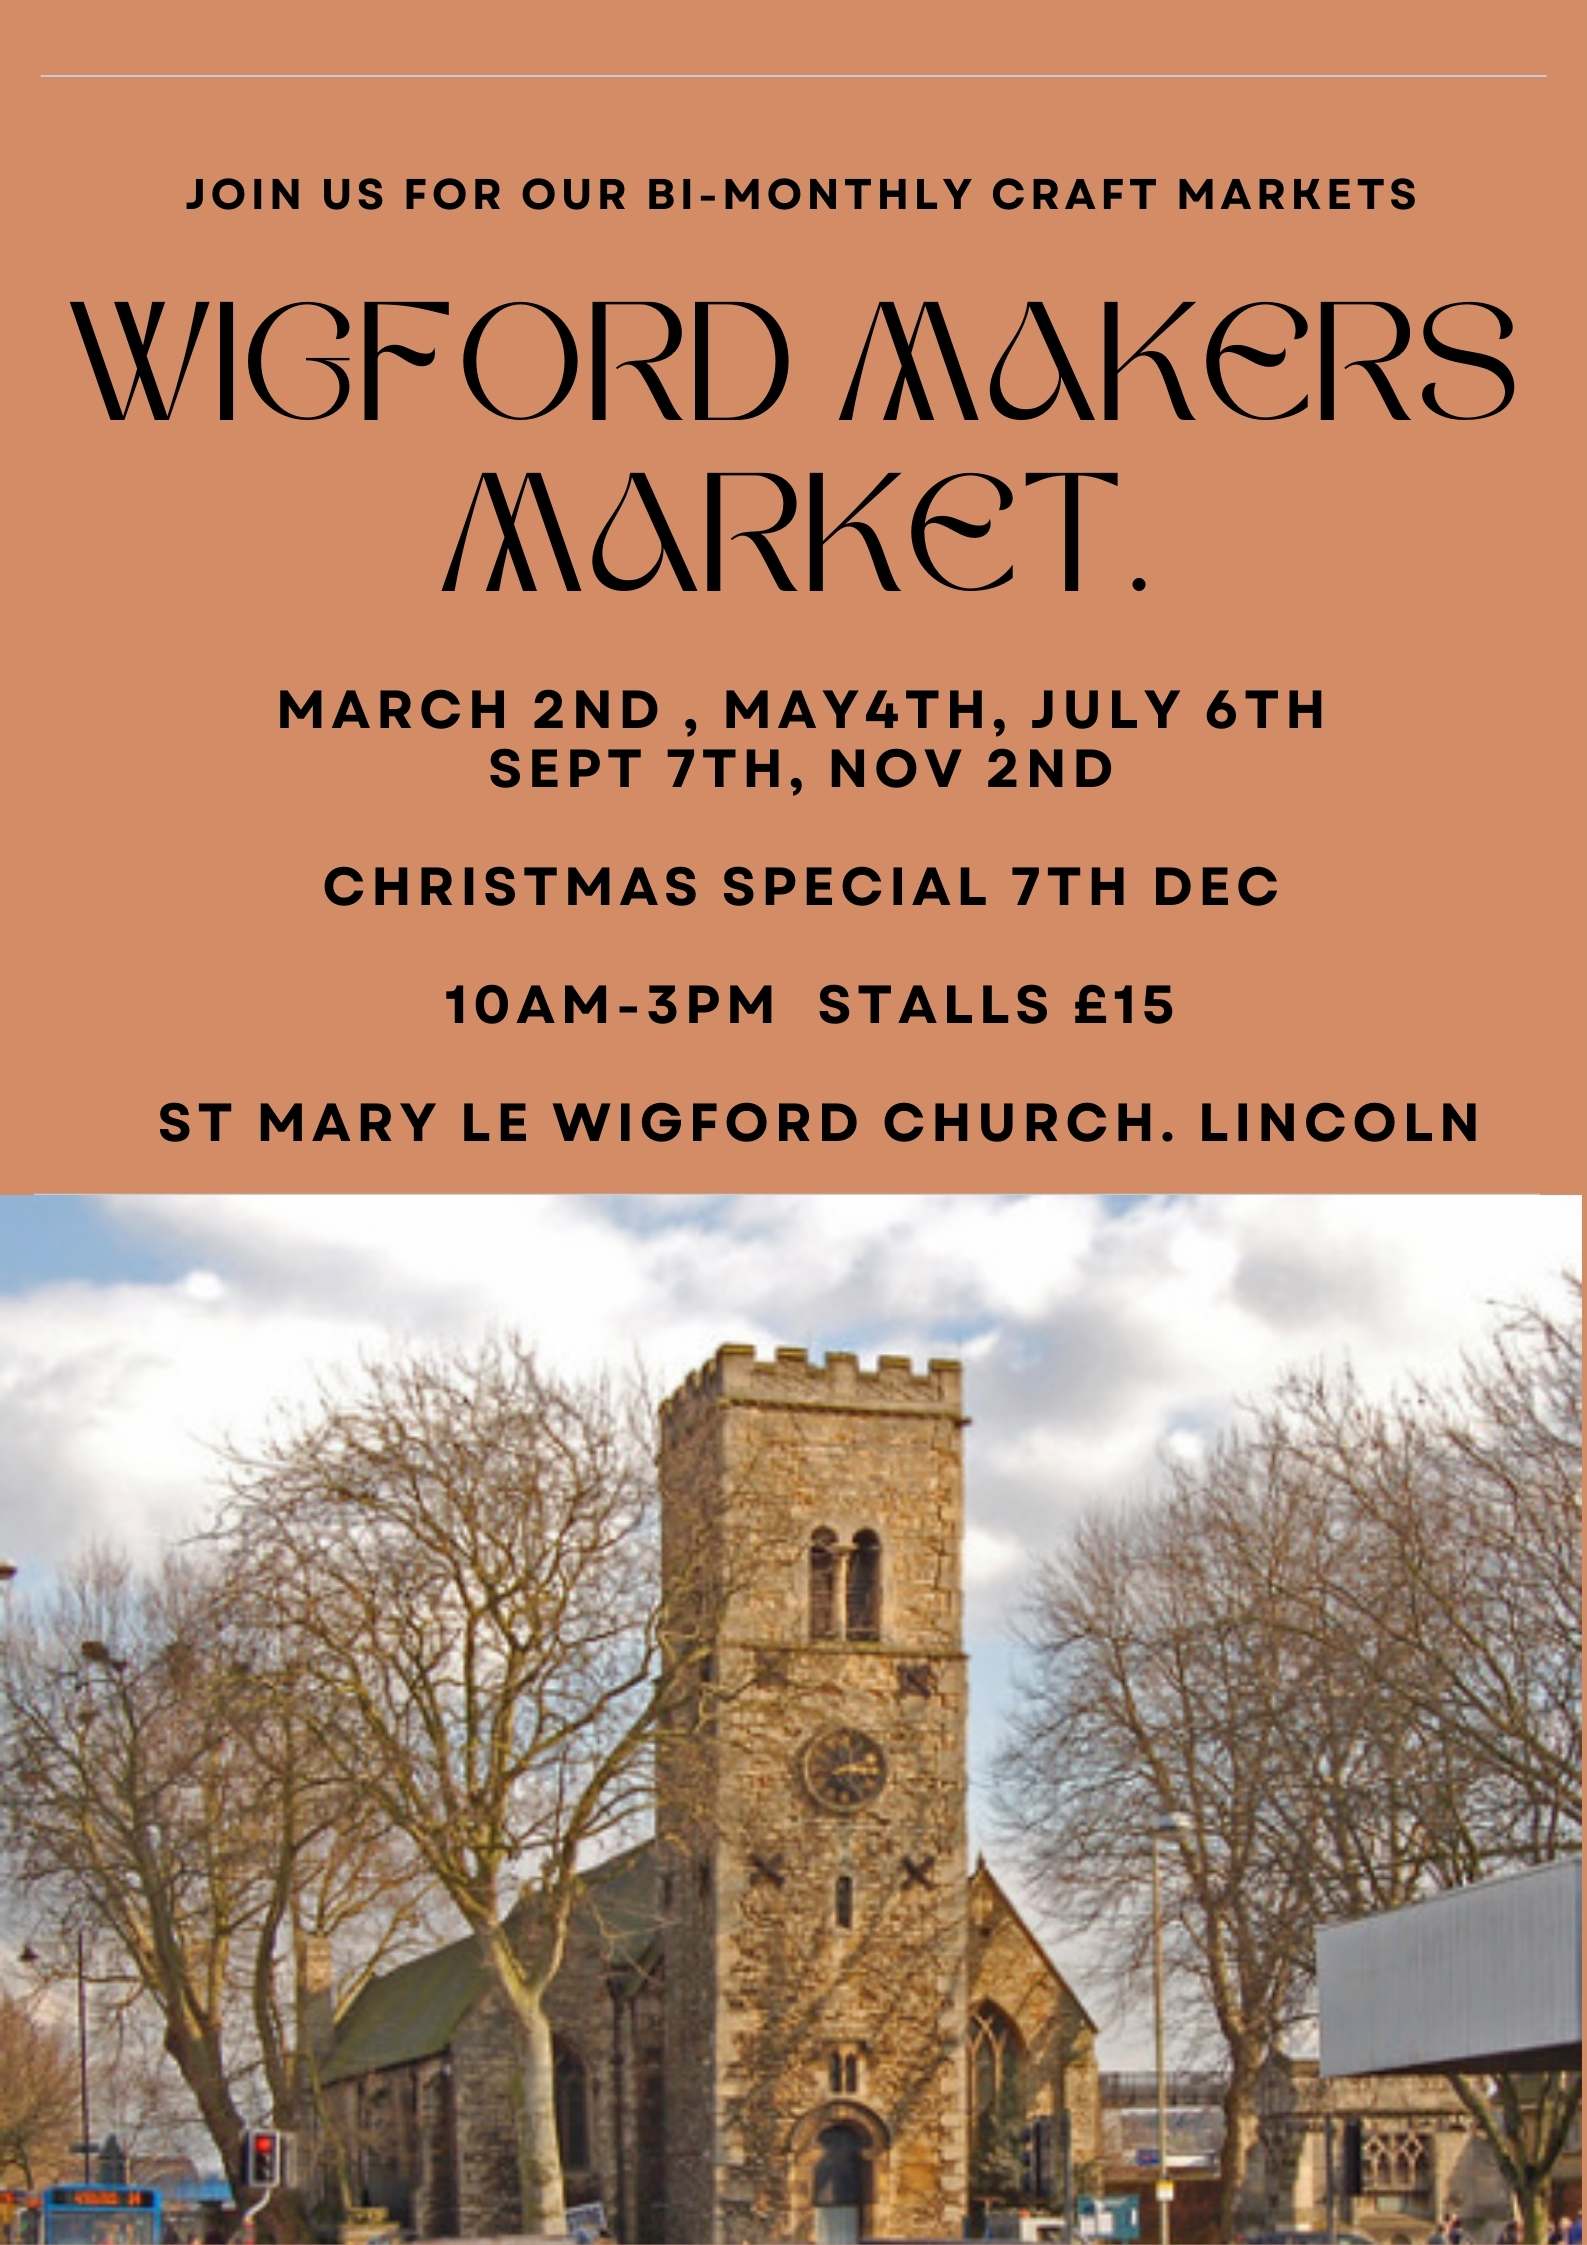 St Mary le Wigford Church, Lincoln